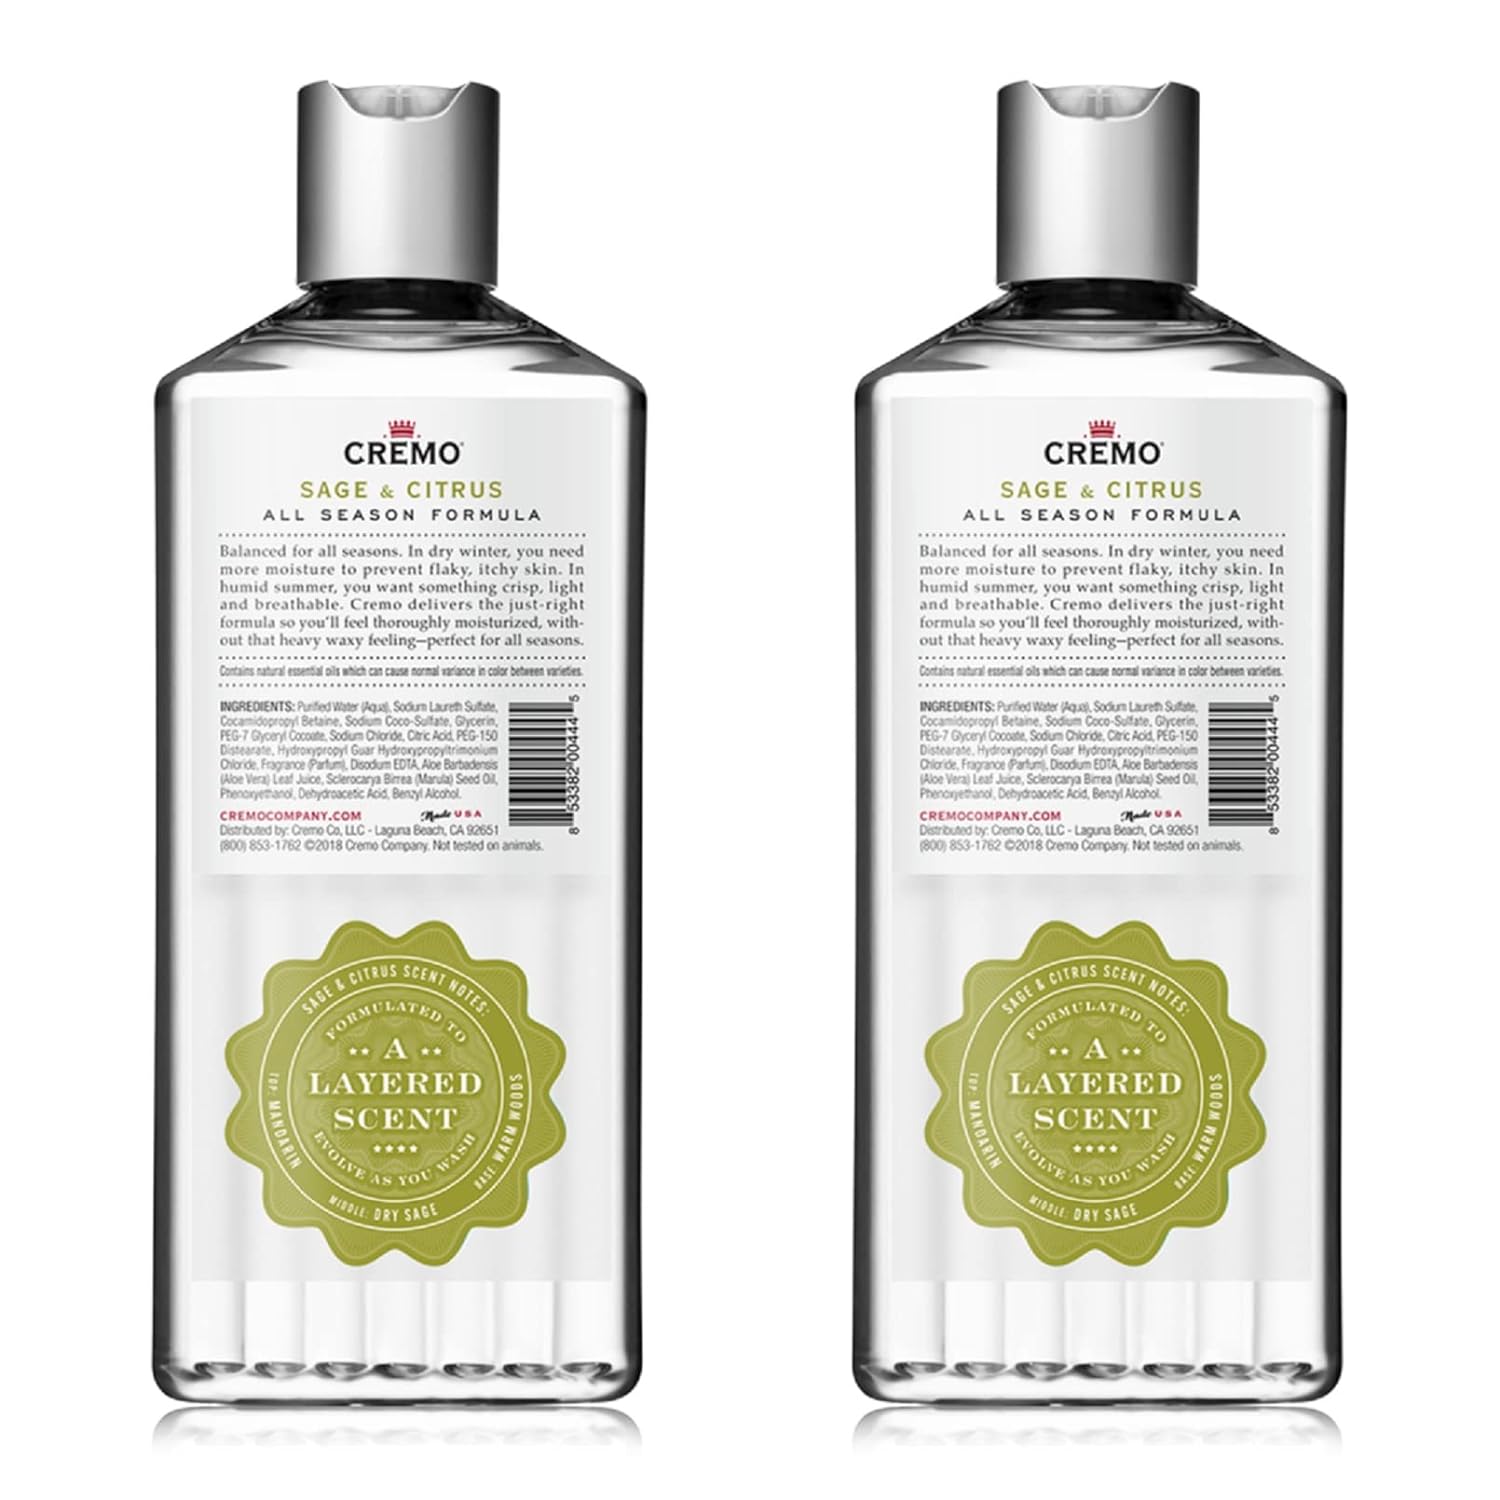 Cremo Rich-Lathering Sage & Citrus Body Wash, A Revitalizing Combination of Bright Mandarin, Dry Herbs and White Cedar, 16 Fl Oz (2-Pack) : Beauty & Personal Care